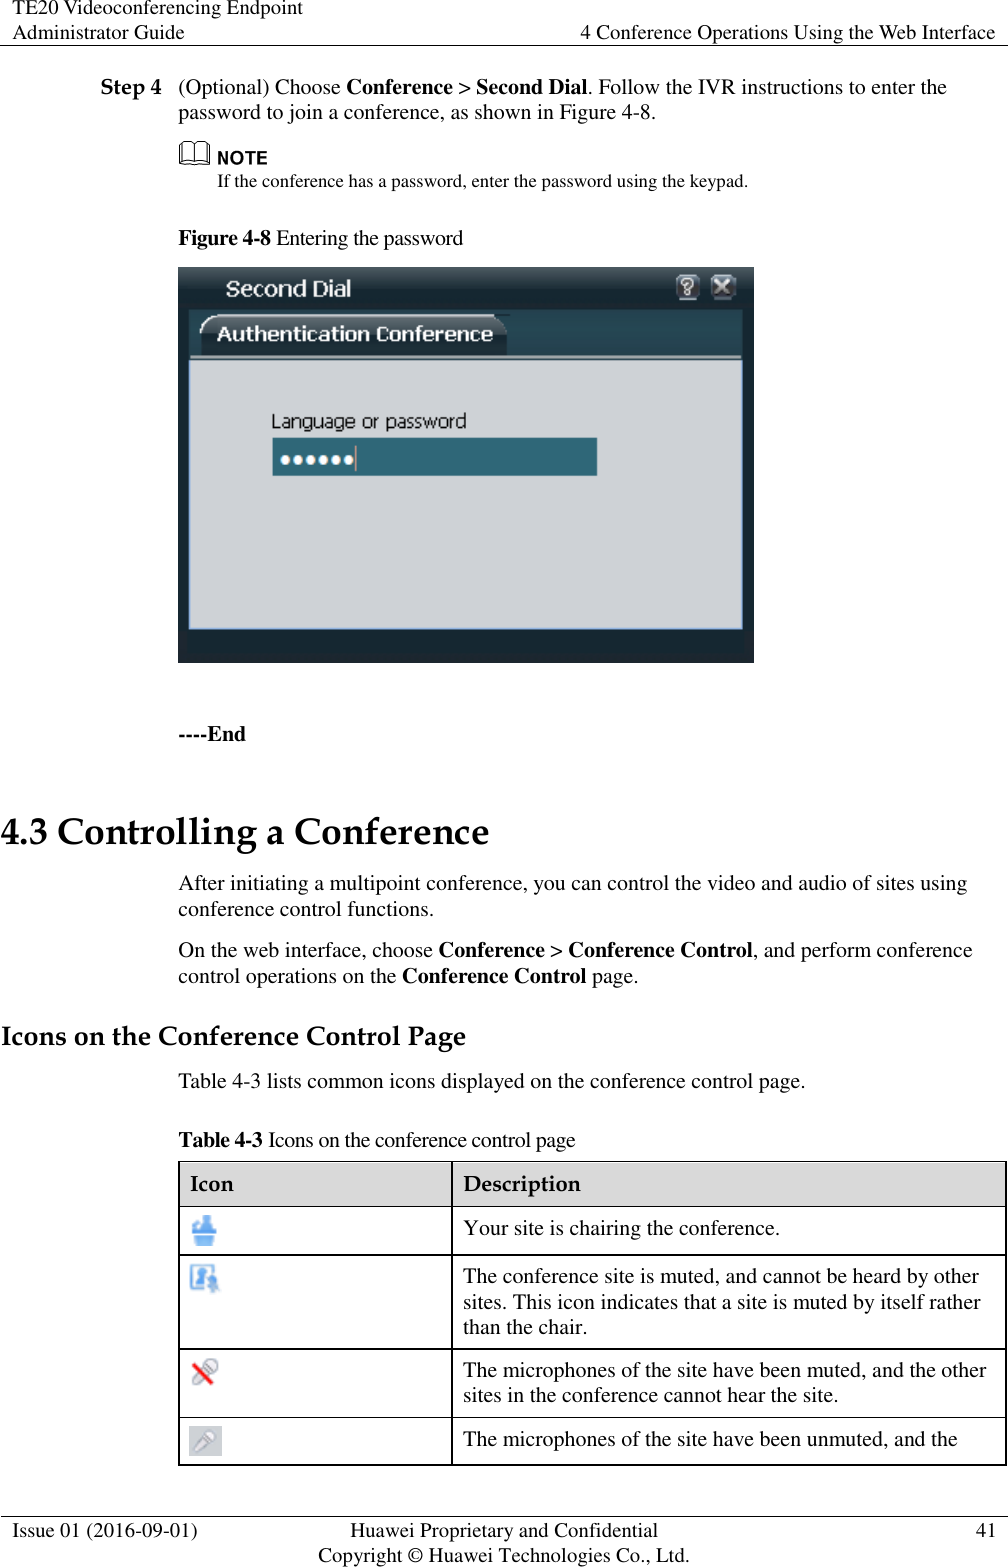 TE20 Videoconferencing Endpoint Administrator Guide 4 Conference Operations Using the Web Interface  Issue 01 (2016-09-01) Huawei Proprietary and Confidential                                     Copyright © Huawei Technologies Co., Ltd. 41  Step 4 (Optional) Choose Conference &gt; Second Dial. Follow the IVR instructions to enter the password to join a conference, as shown in Figure 4-8.  If the conference has a password, enter the password using the keypad. Figure 4-8 Entering the password   ----End 4.3 Controlling a Conference After initiating a multipoint conference, you can control the video and audio of sites using conference control functions. On the web interface, choose Conference &gt; Conference Control, and perform conference control operations on the Conference Control page. Icons on the Conference Control Page Table 4-3 lists common icons displayed on the conference control page. Table 4-3 Icons on the conference control page Icon Description  Your site is chairing the conference.  The conference site is muted, and cannot be heard by other sites. This icon indicates that a site is muted by itself rather than the chair.  The microphones of the site have been muted, and the other sites in the conference cannot hear the site.  The microphones of the site have been unmuted, and the 